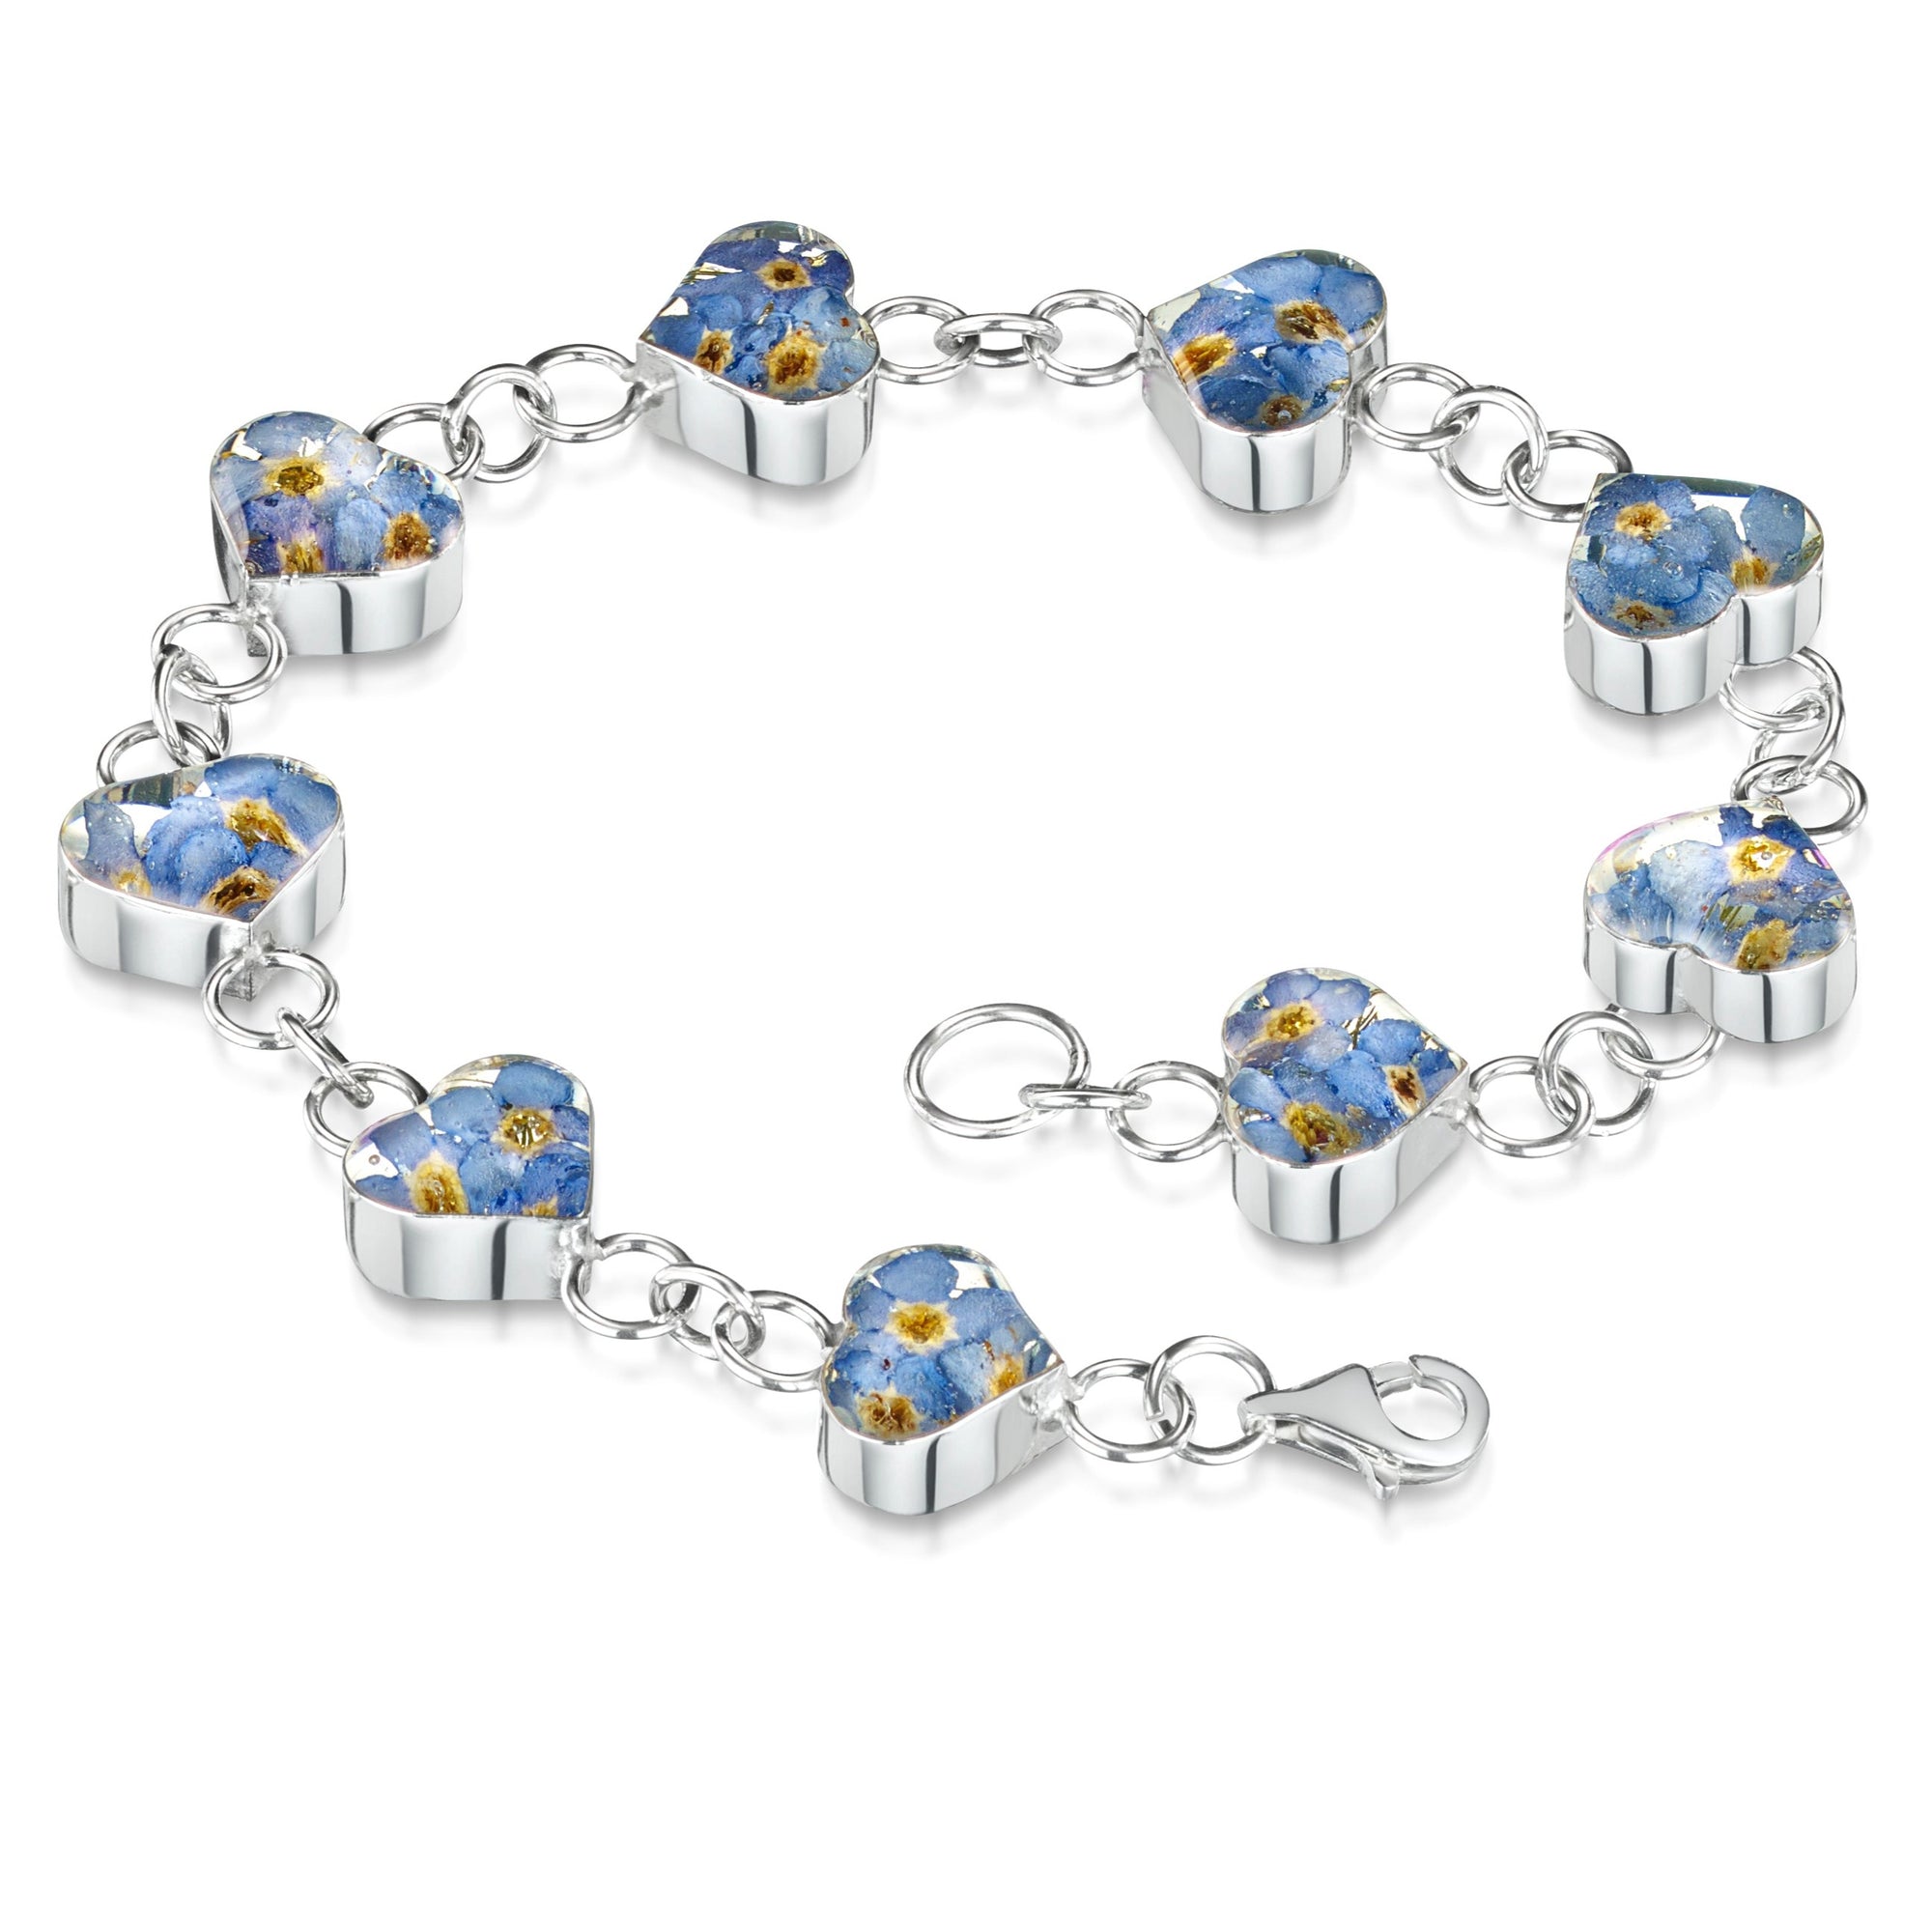 Sterling silver nine-heart bracelet with lobster clasp. Each heart charm has real forget-me-not flowers set in resin.